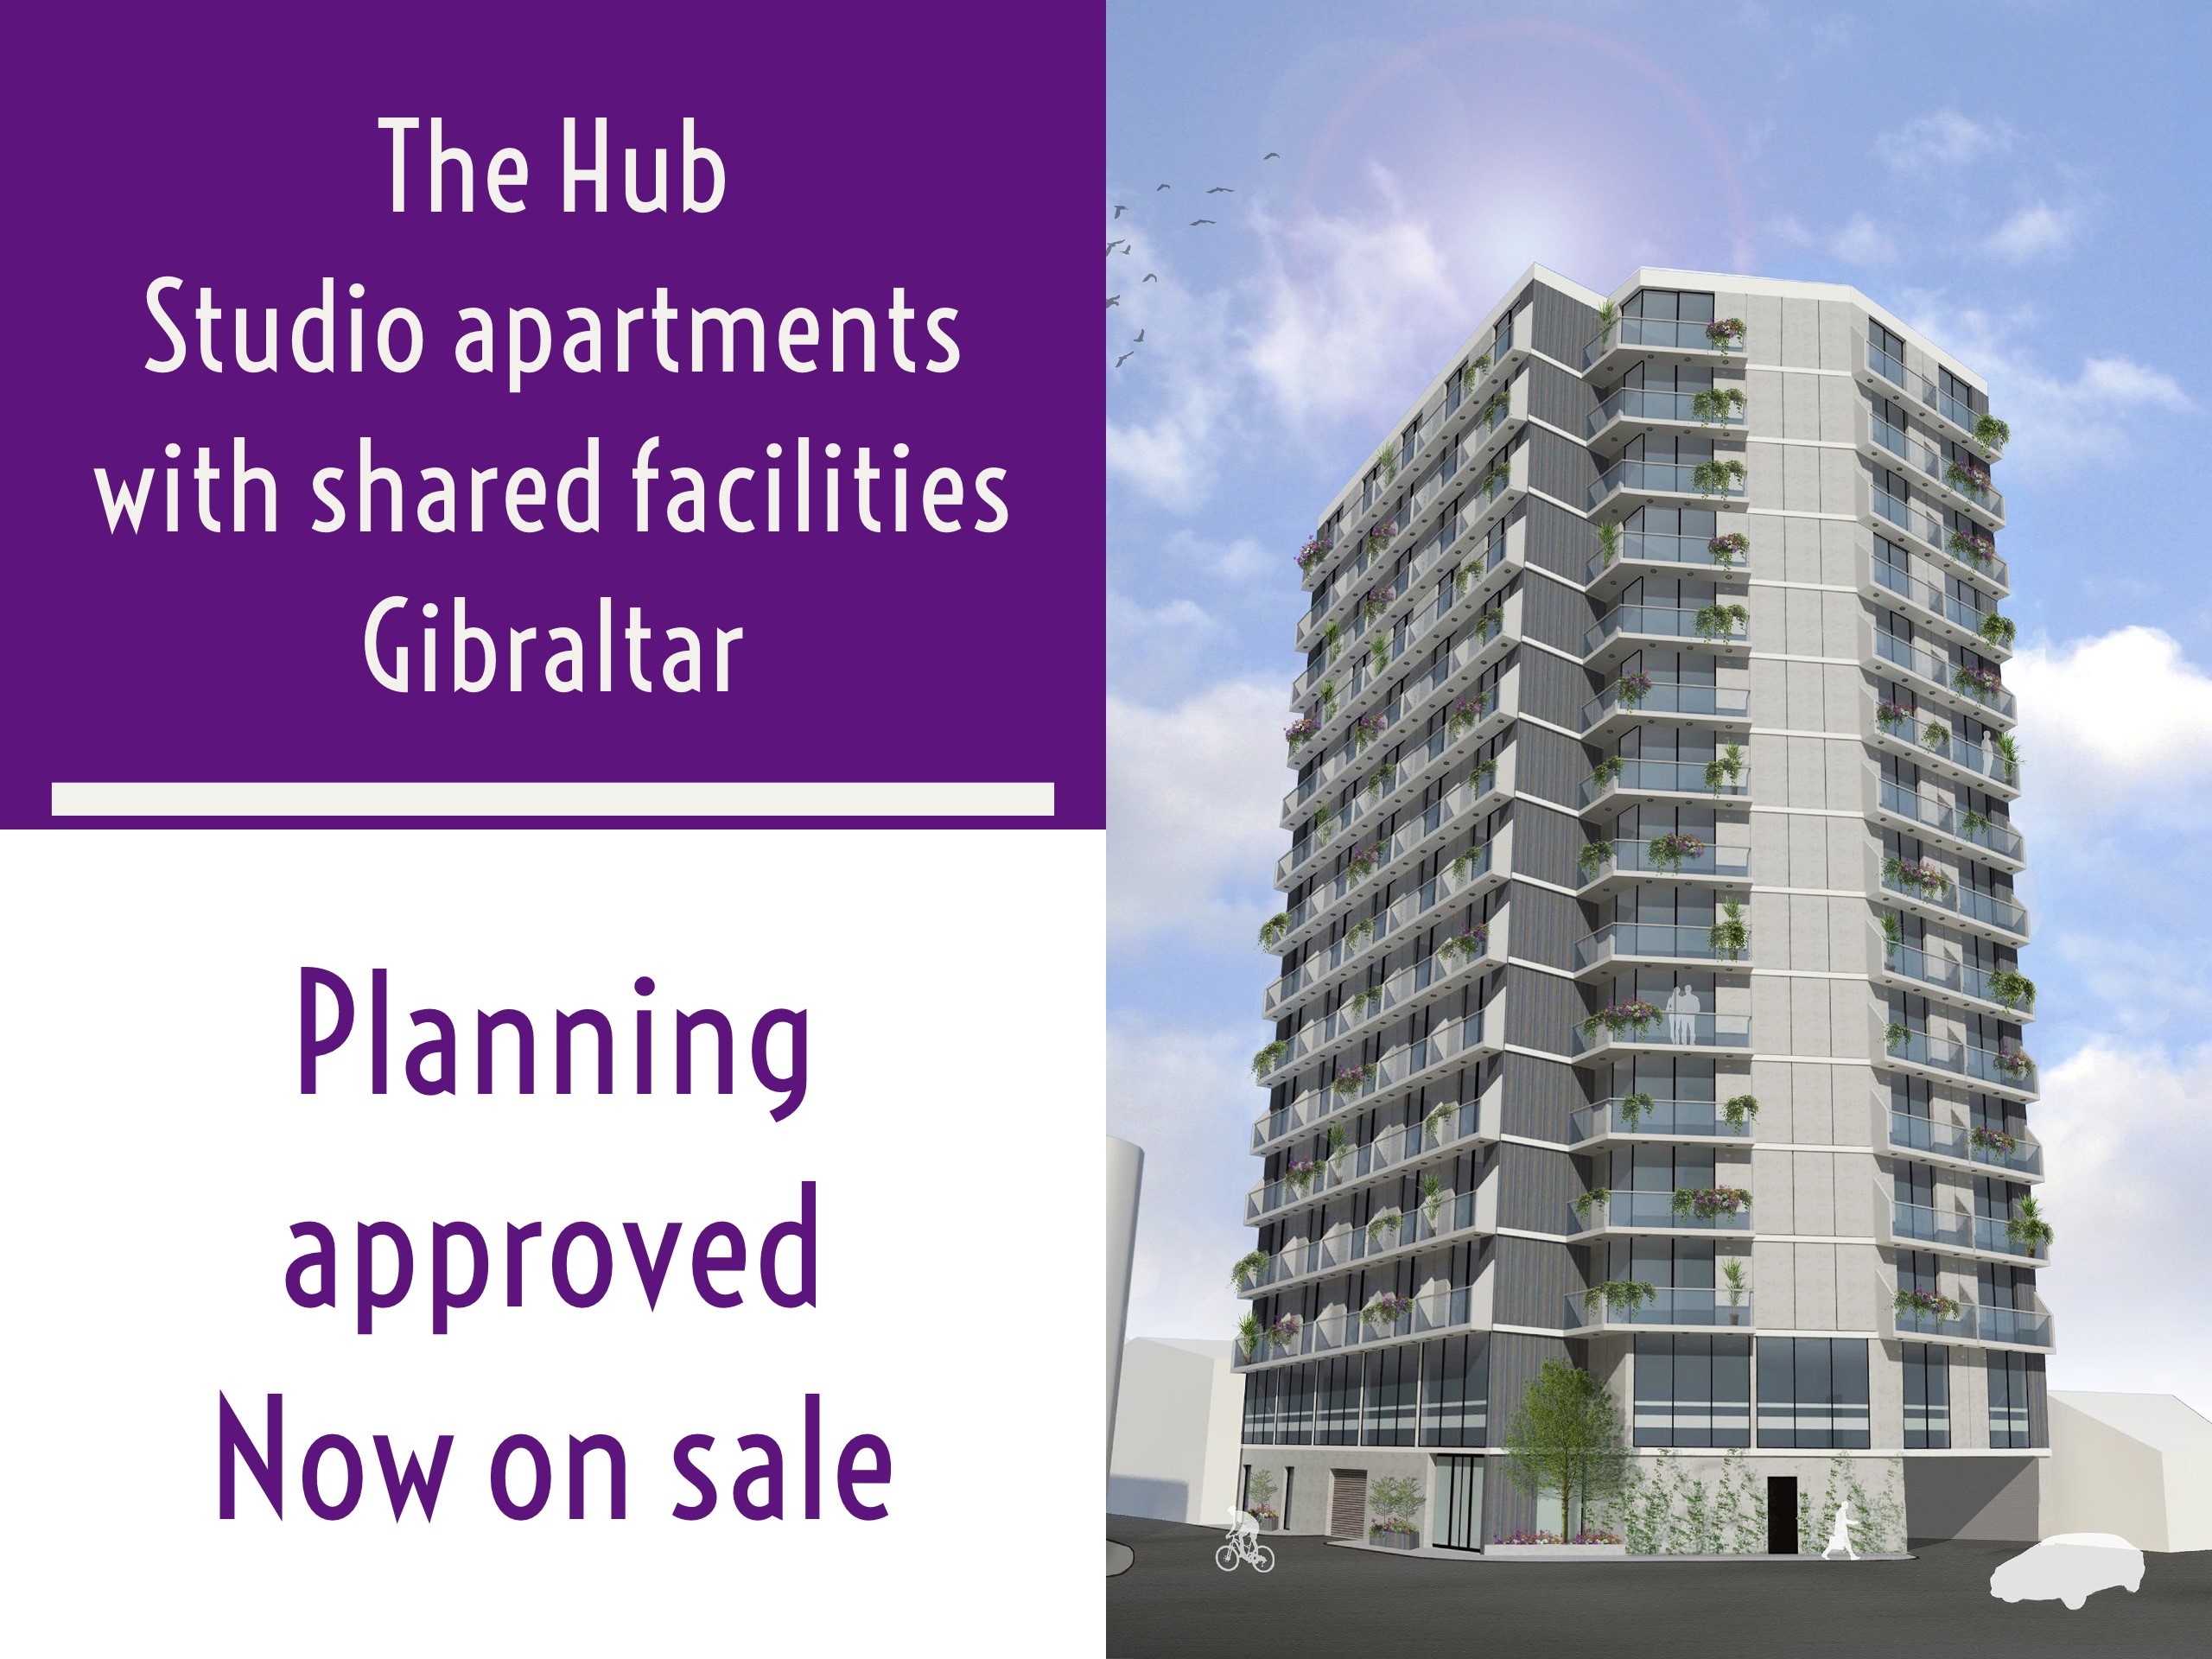 The Hub - planning approved and now on sale Image